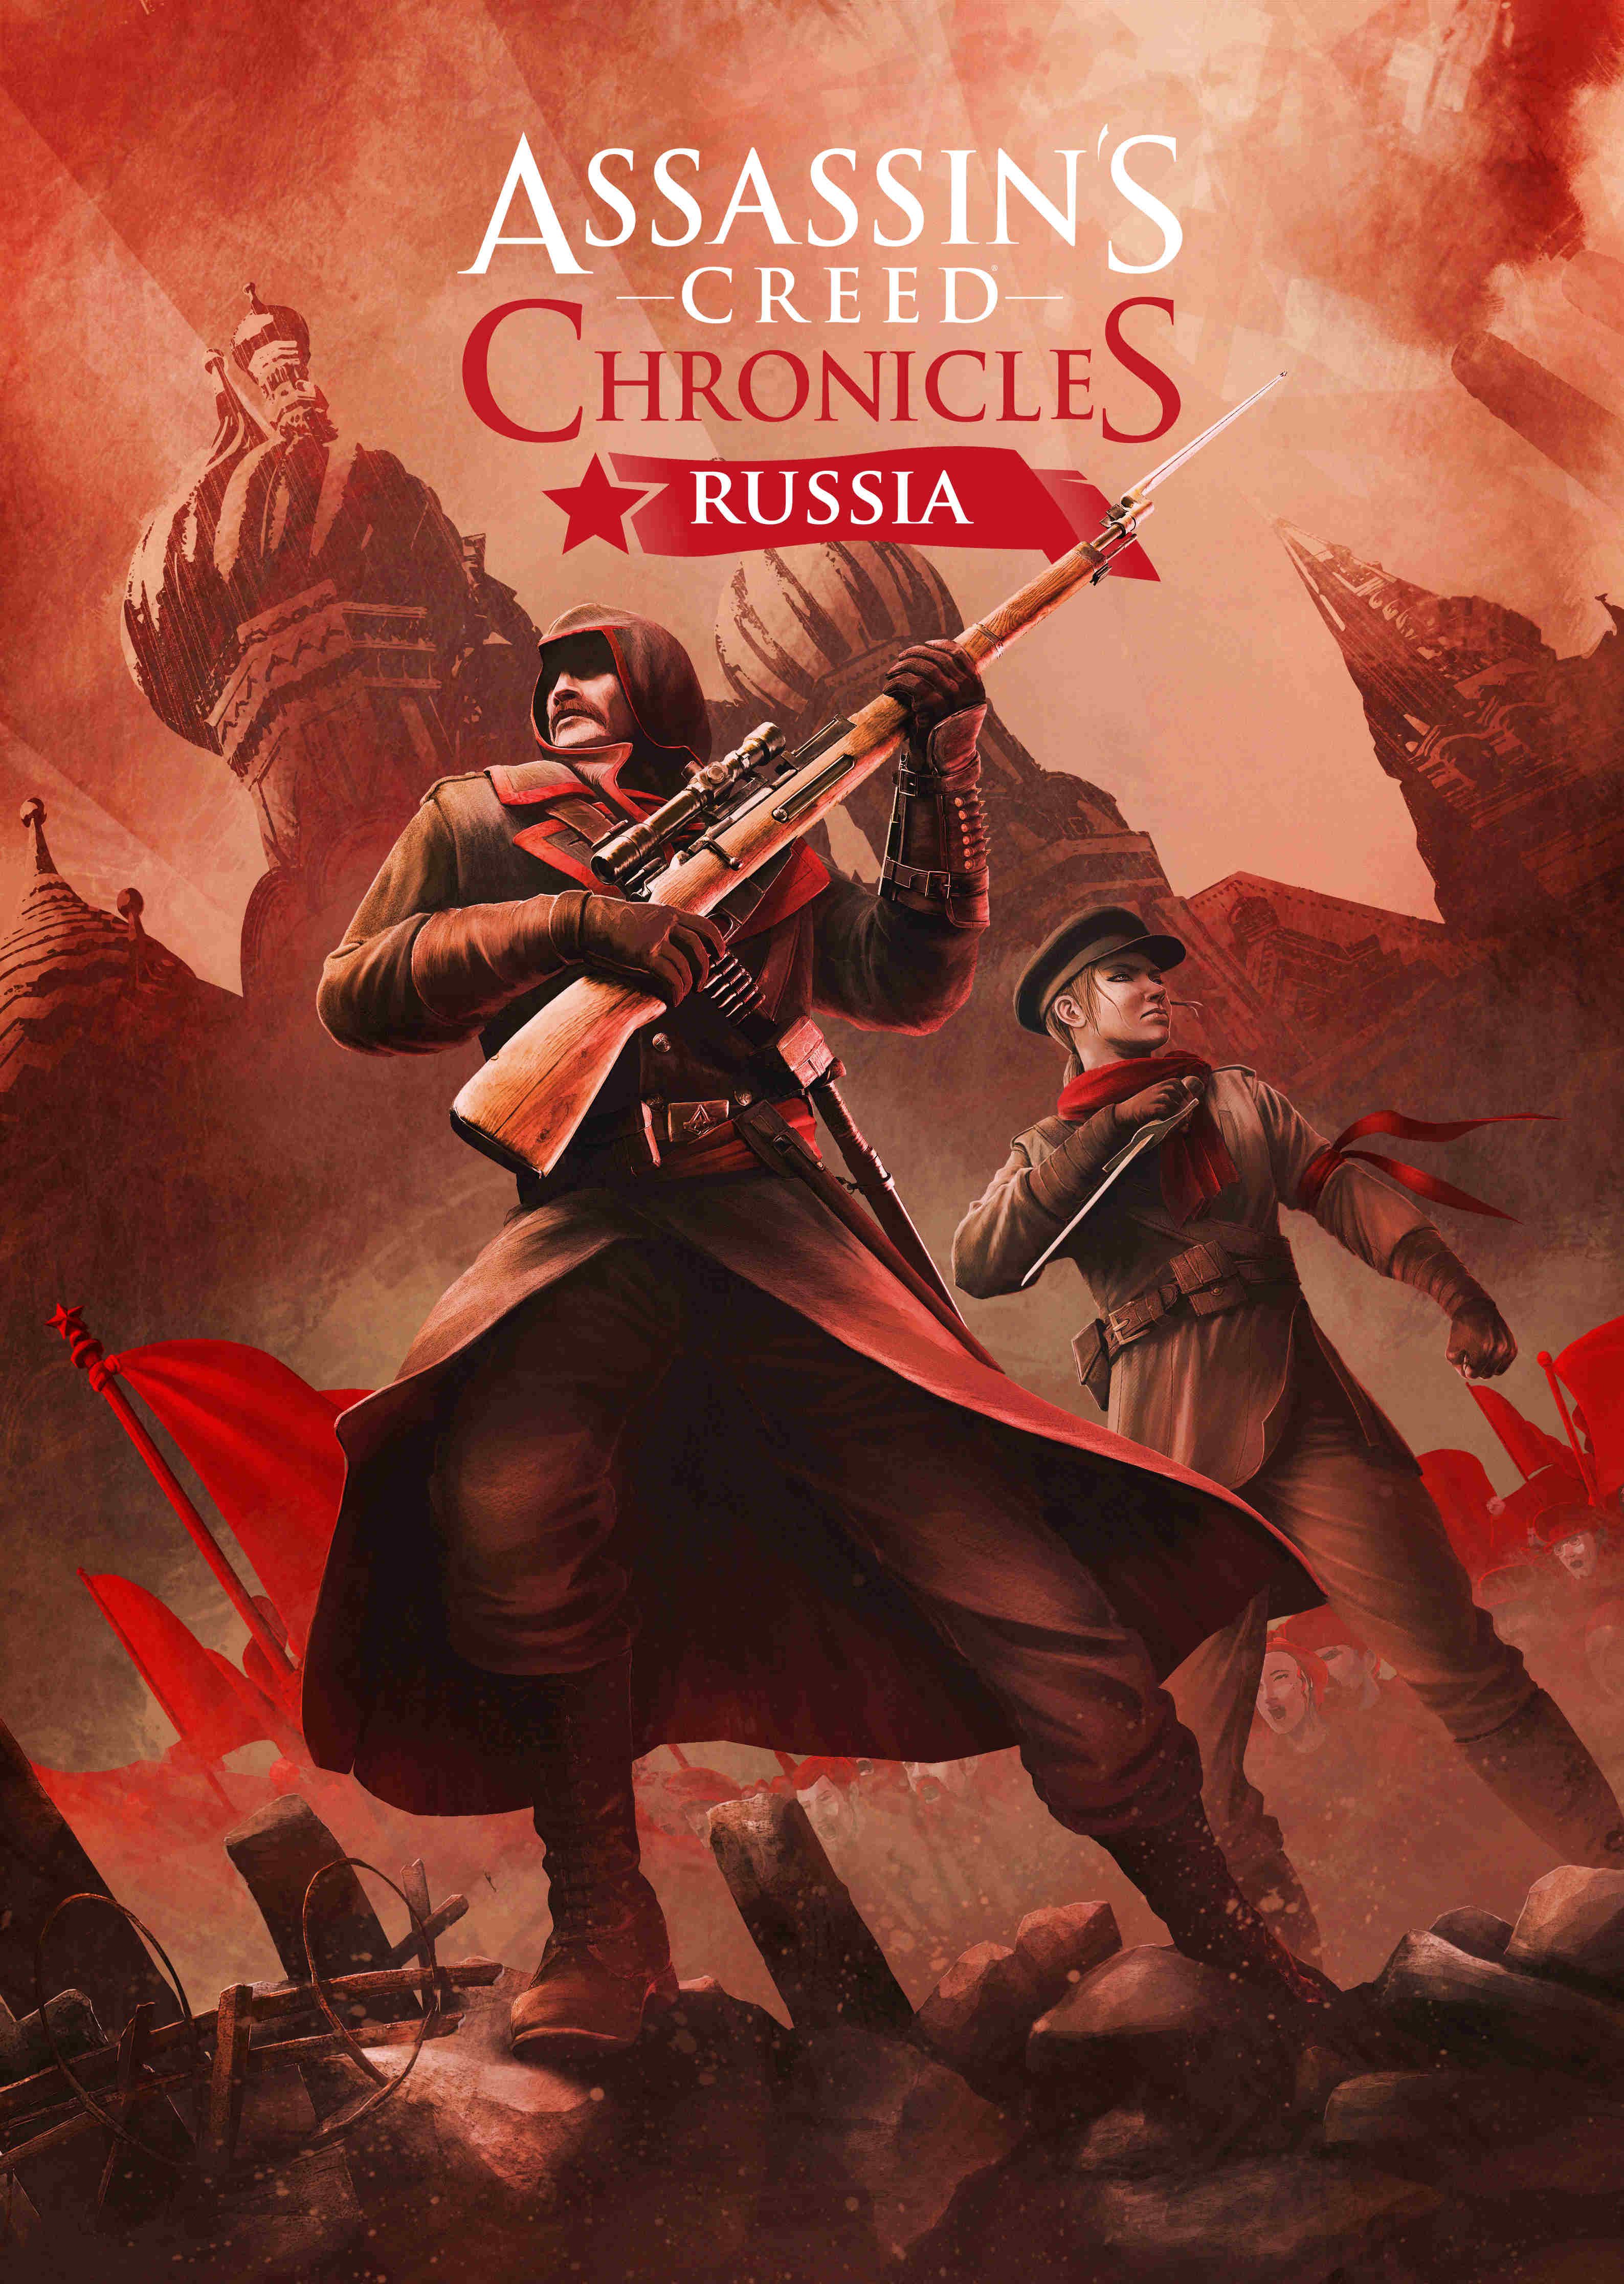 Assassin's Creed Chronicles : Russia (2016)  - Jeu vidéo streaming VF gratuit complet